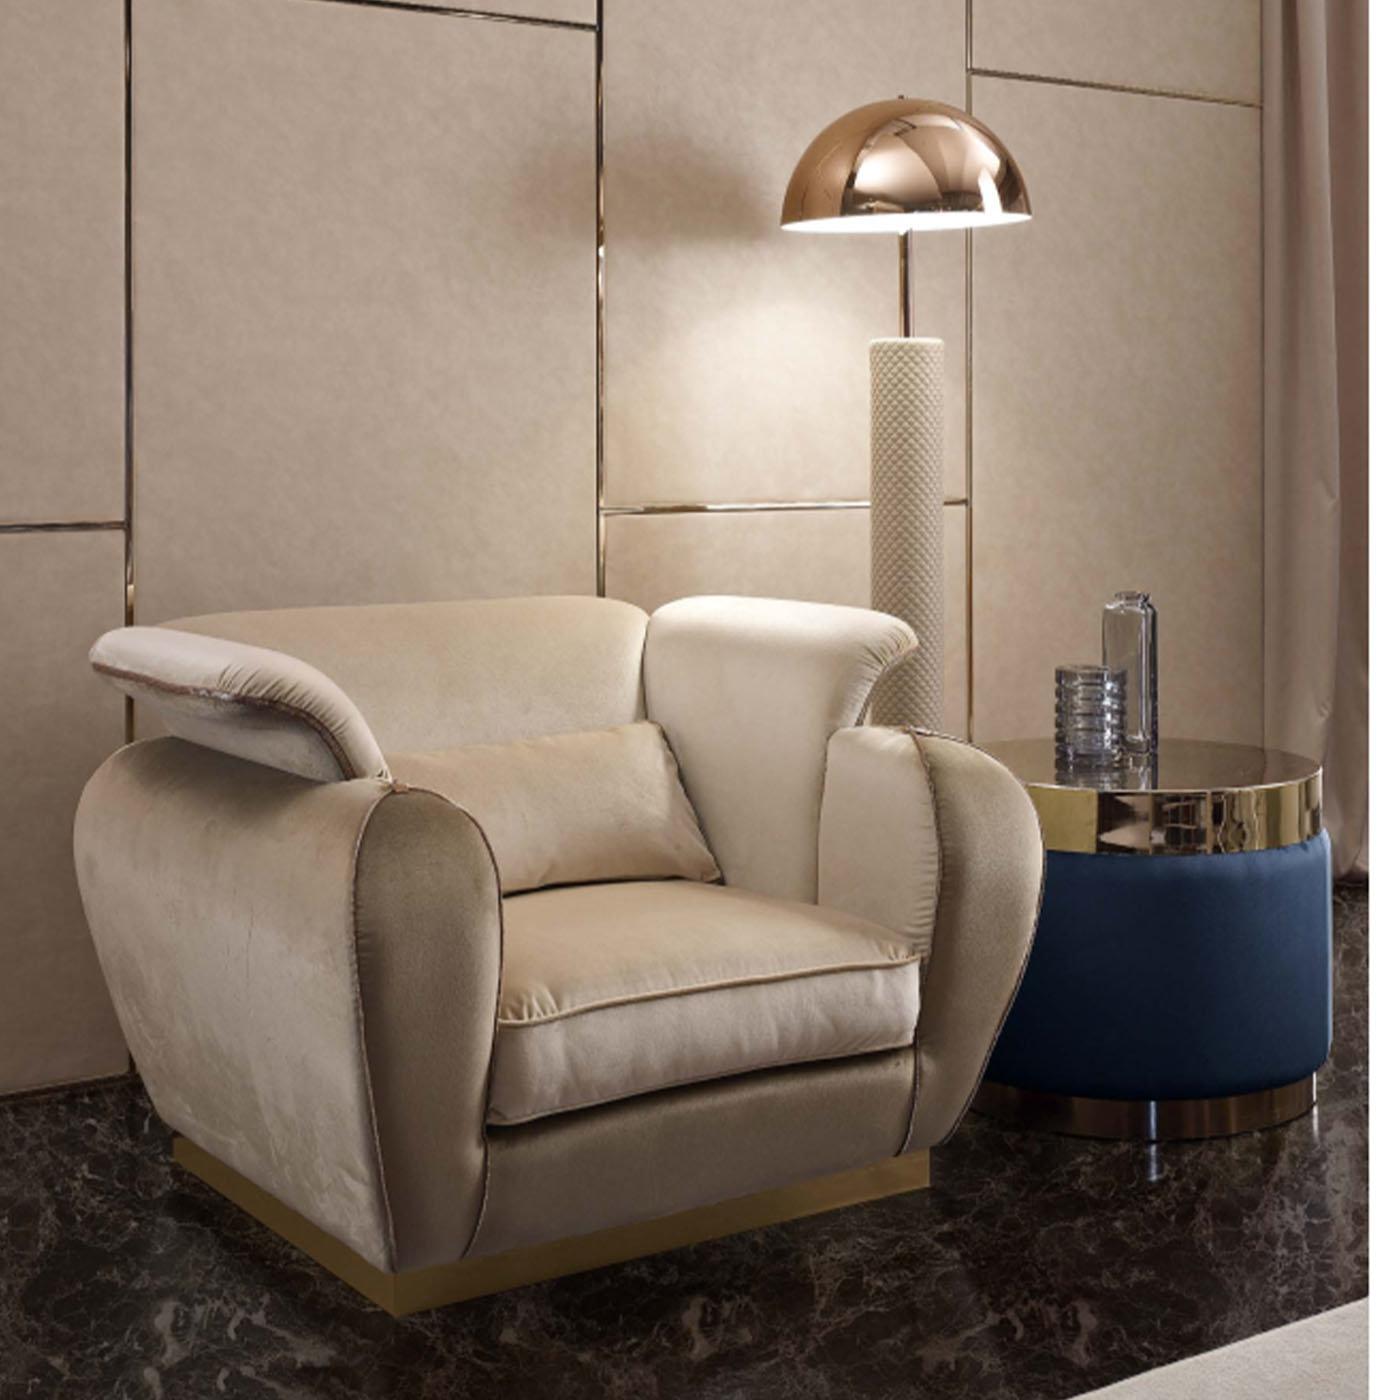 Flaunting a superb aesthetic with a wrap-around back and armrests, this armchair's perfect proportions look both chic and sleek without compromising on comfort. Fully covered in super soft fabric in two neutral hues - cream from the interior and